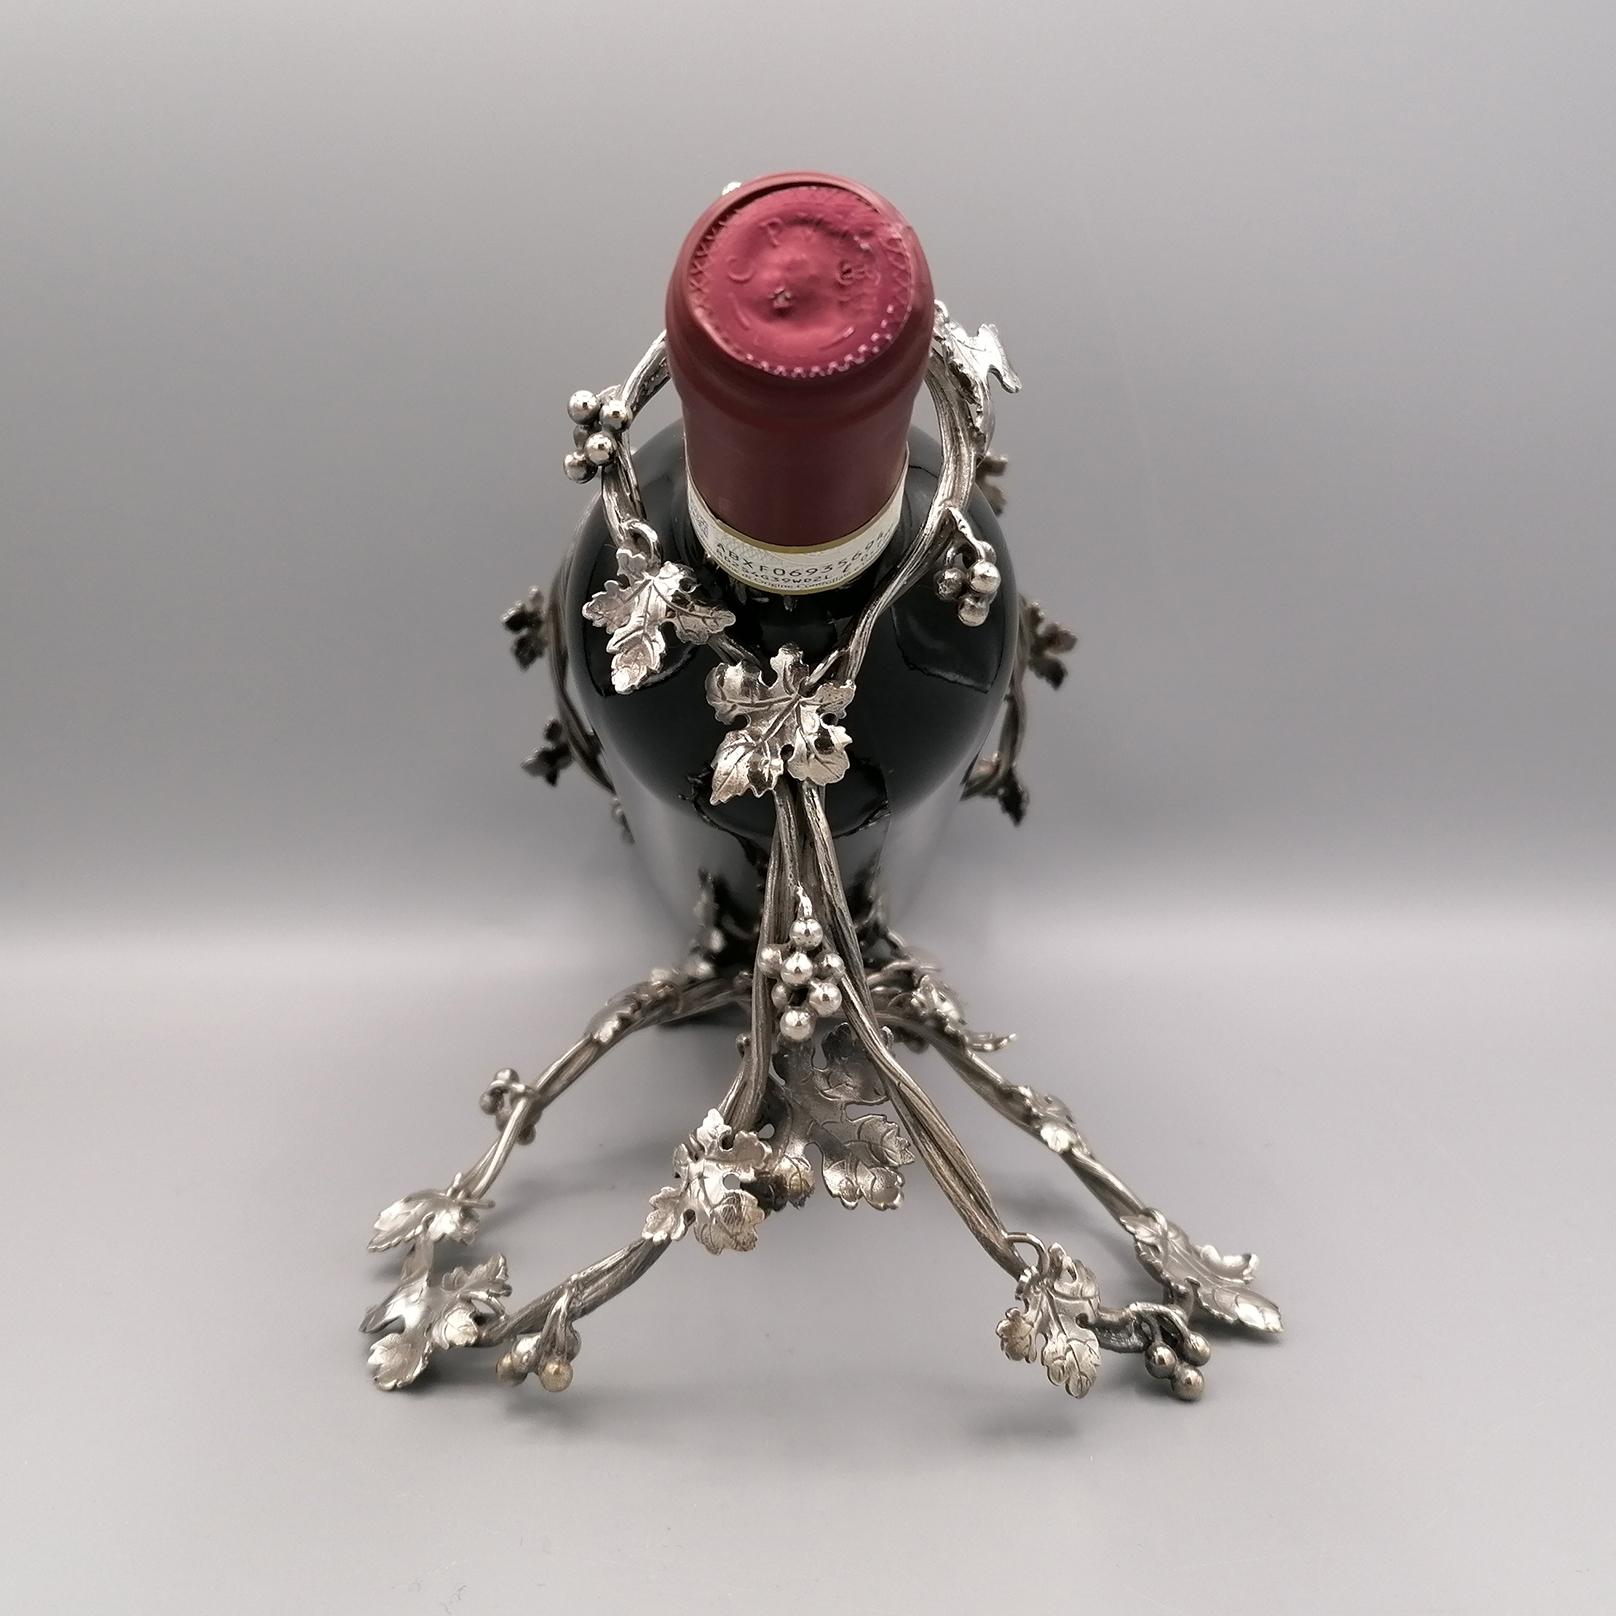 Contemporary 21st Century Italian Sterling Silver Red Wine Bottle Holder For Sale